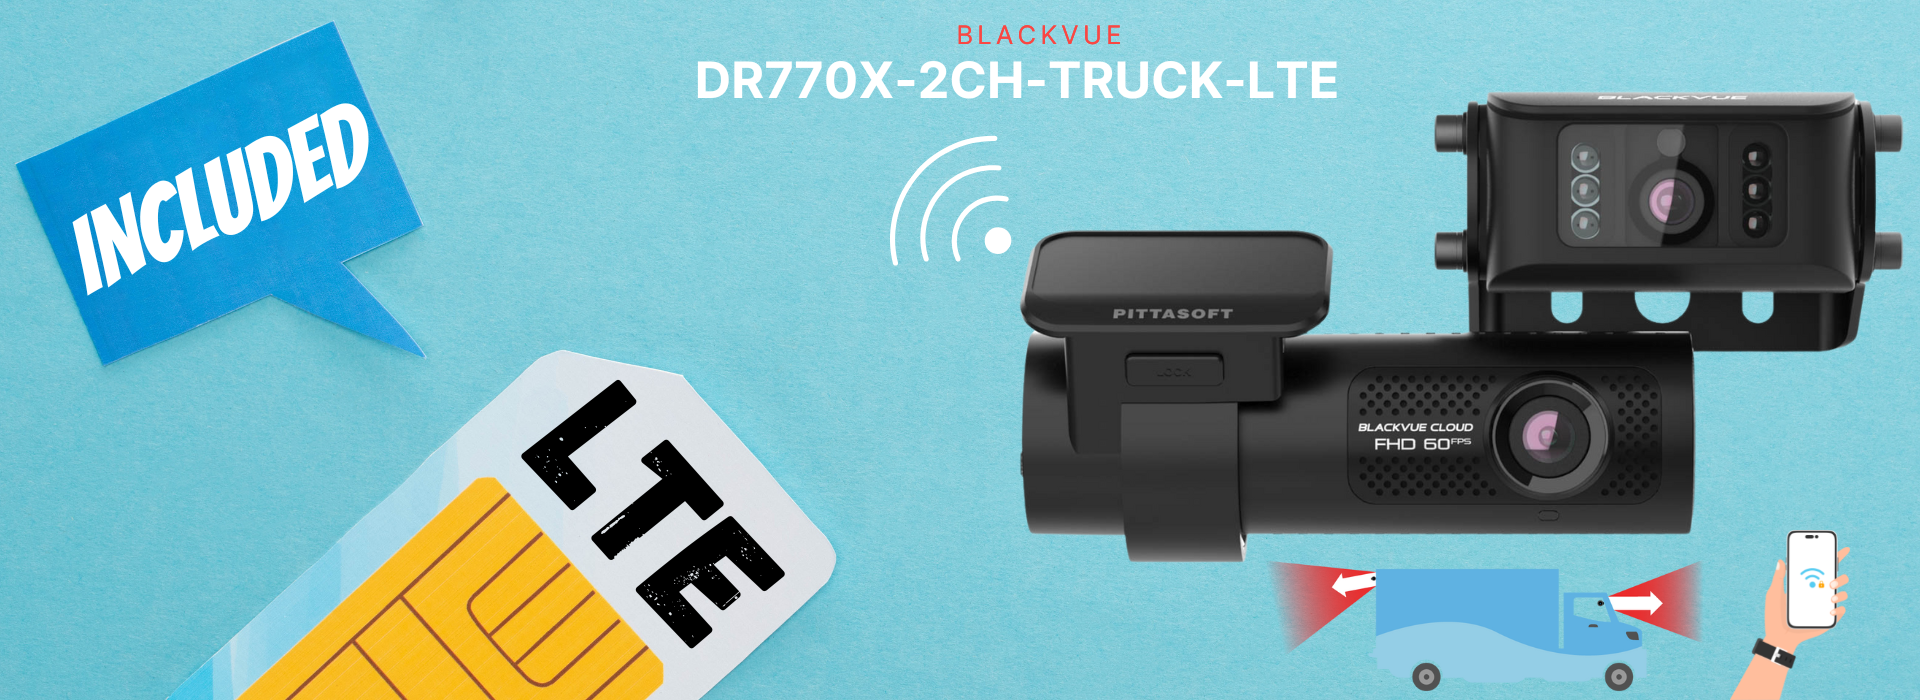 BlackVue DR770X-2CH-TRUCK-LTE | Weatherproof And Always Connected